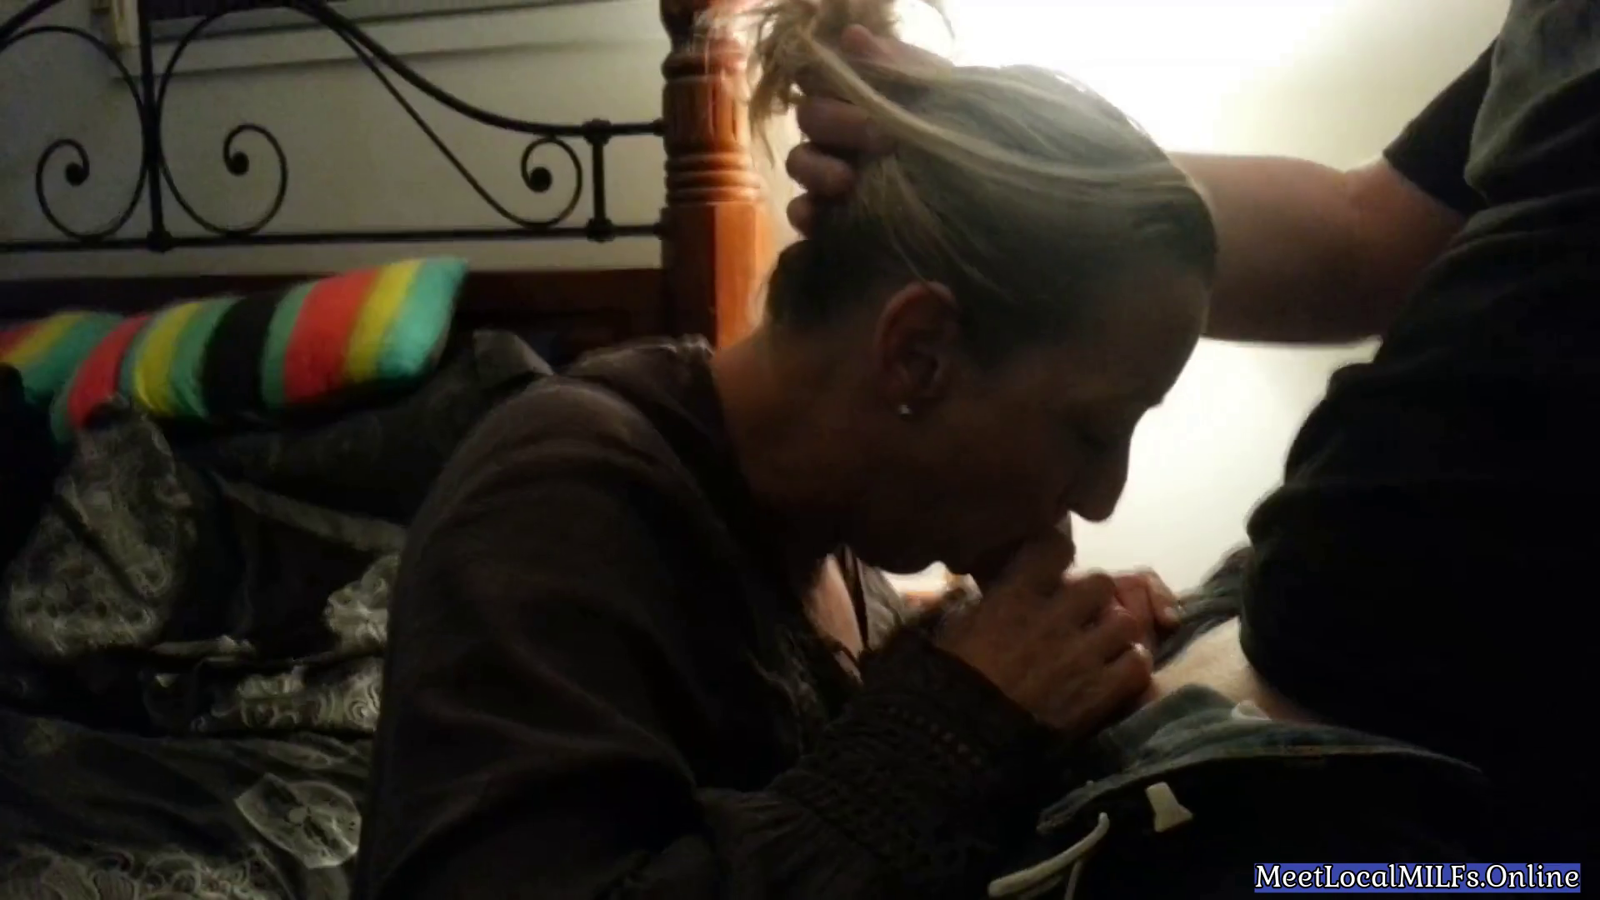 Video by LarissaMILF with the username @LarissaMILF,  October 16, 2020 at 12:59 AM. The post is about the topic Fuck my Wife and the text says 'Amateur Cuckolding MILF Sucking Husband And His Best Friend
#hotwife #milf #cuckold'